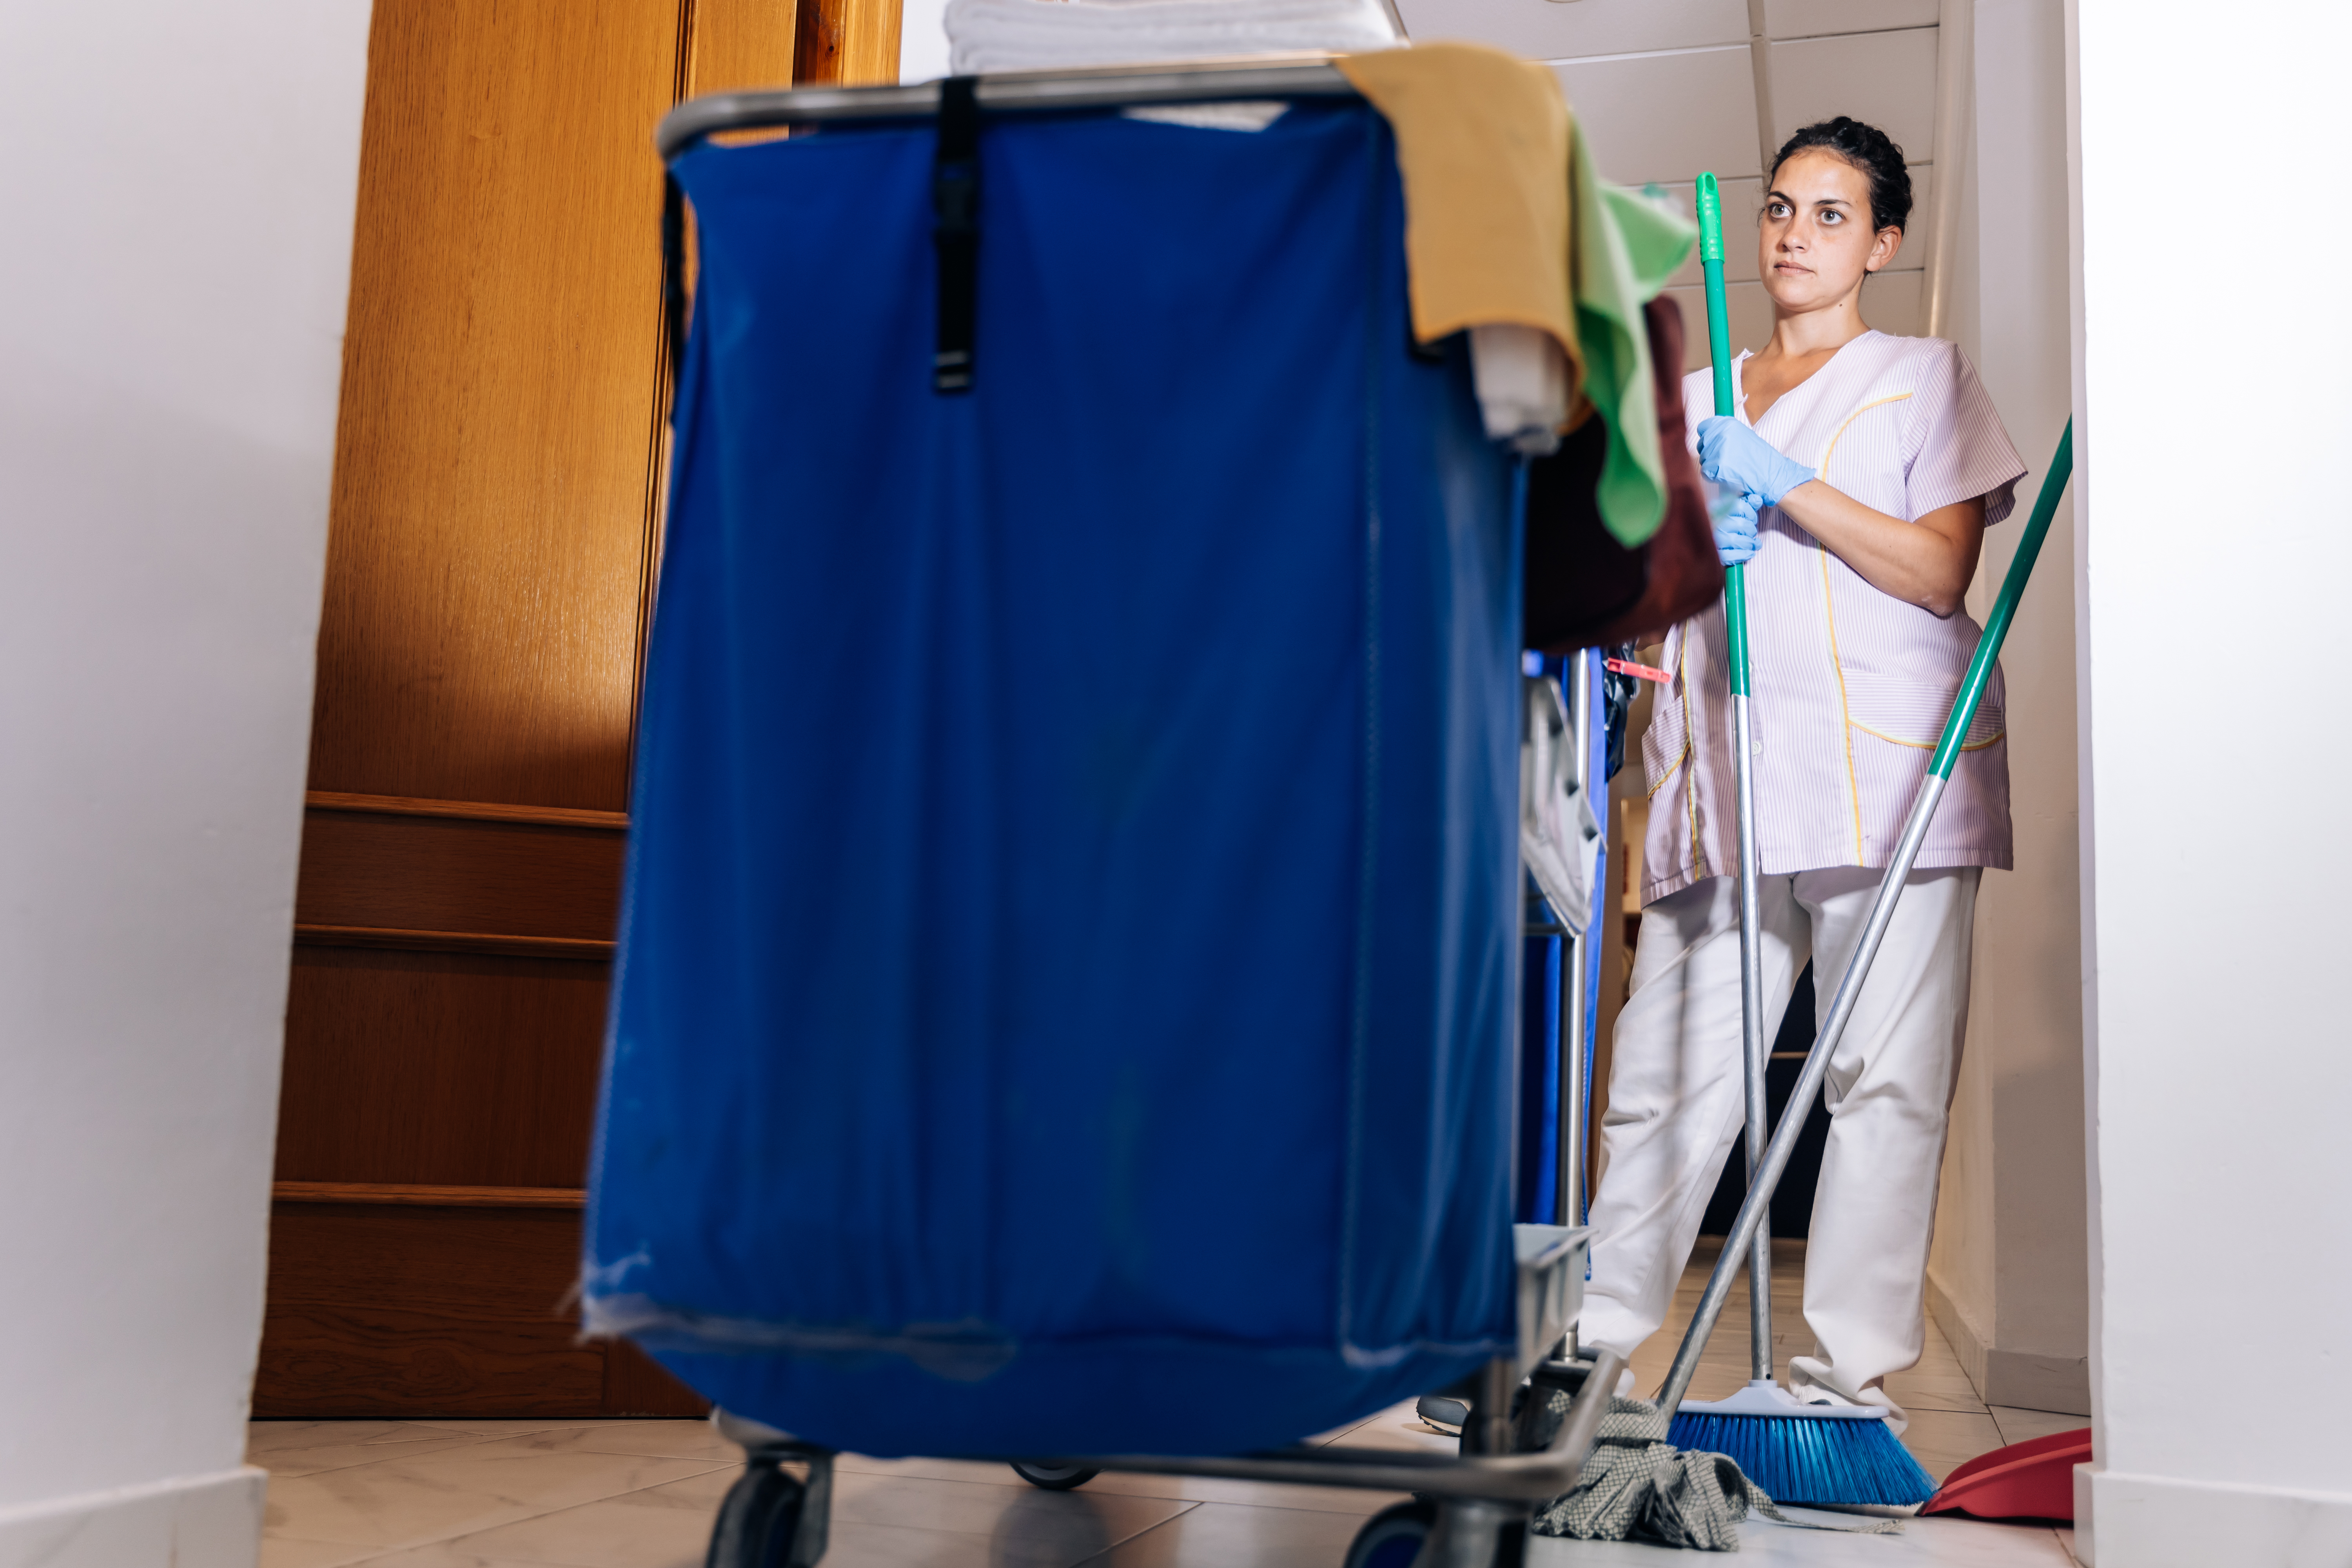 A hotel cleaning employee standing next to a trolley | Source: Shutterstock